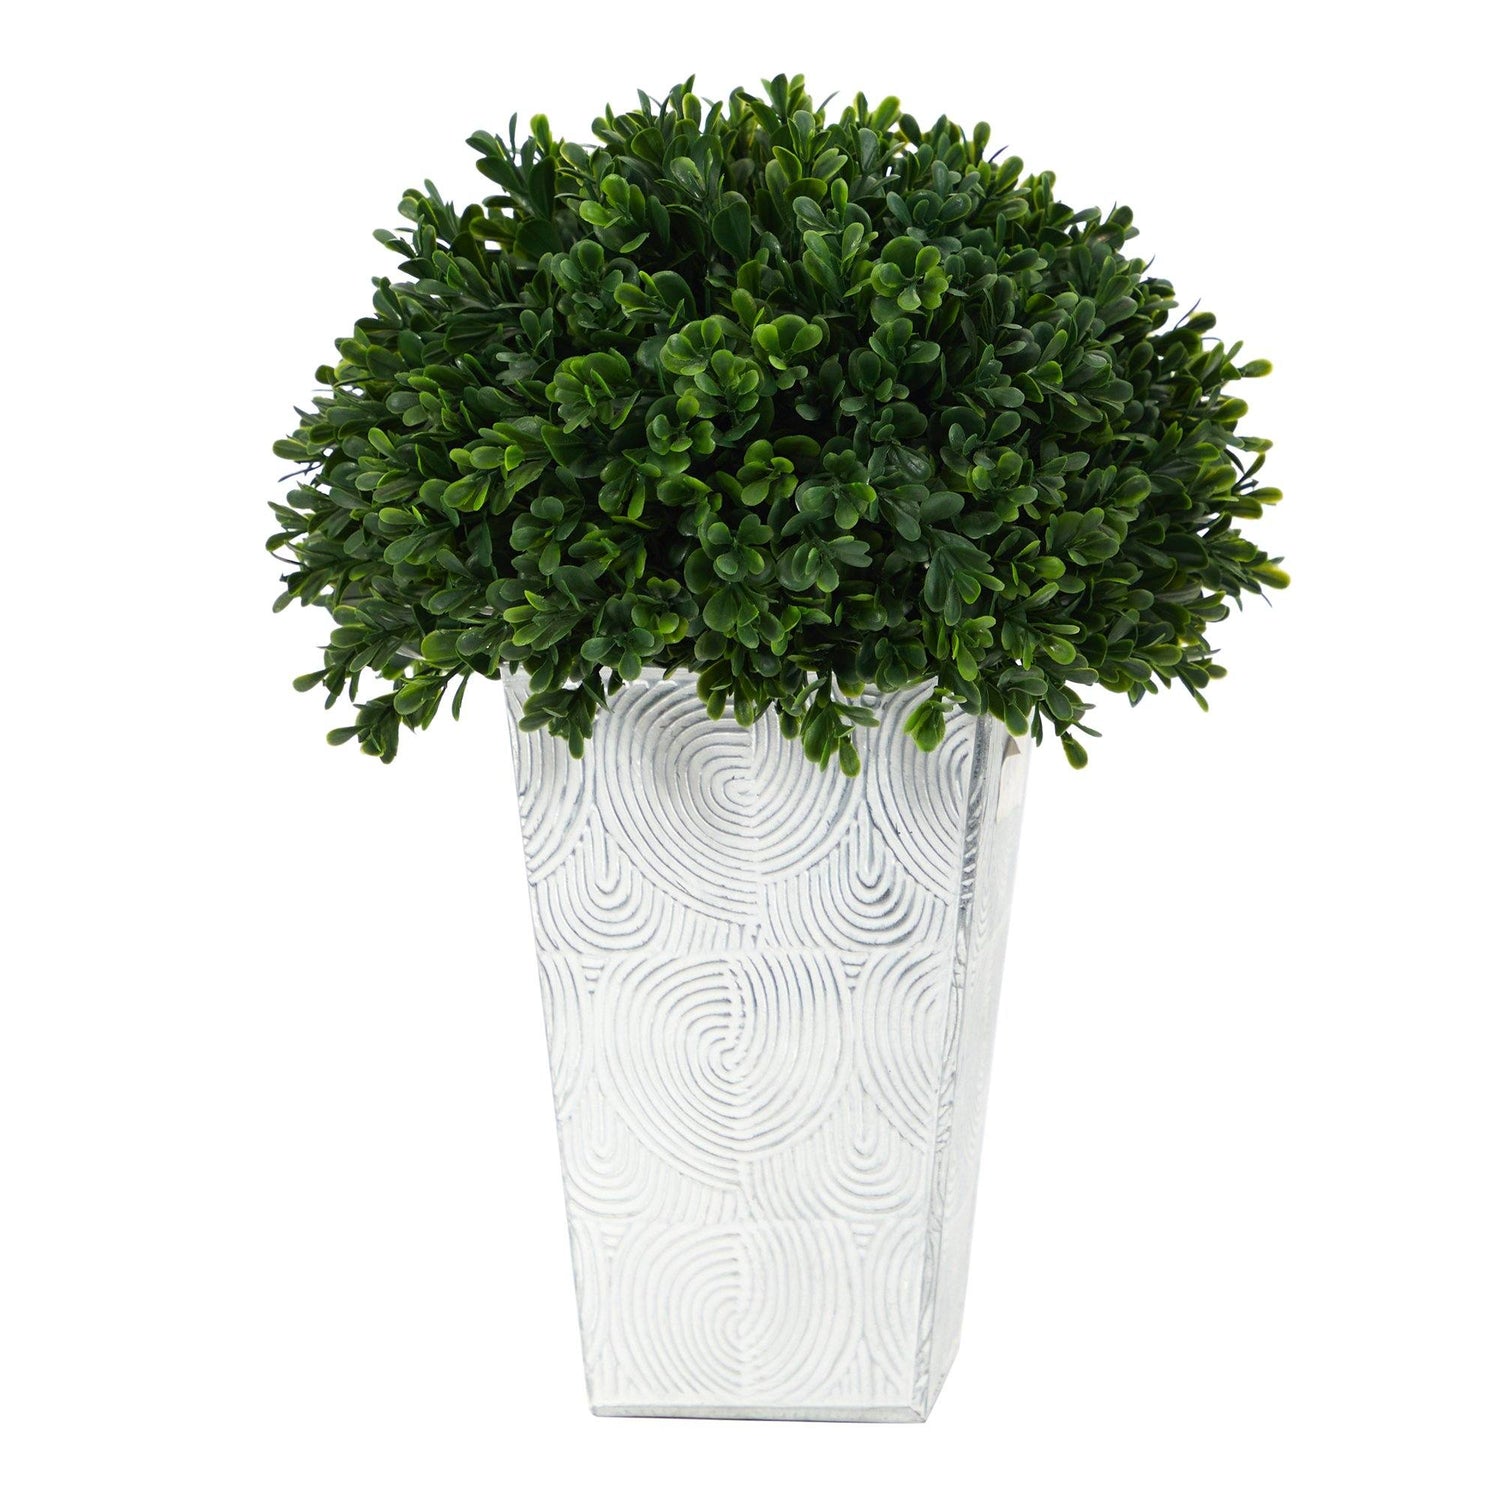 13” Boxwood Topiary Artificial Plant in Embossed White Planter(Indoor/Outdoor)